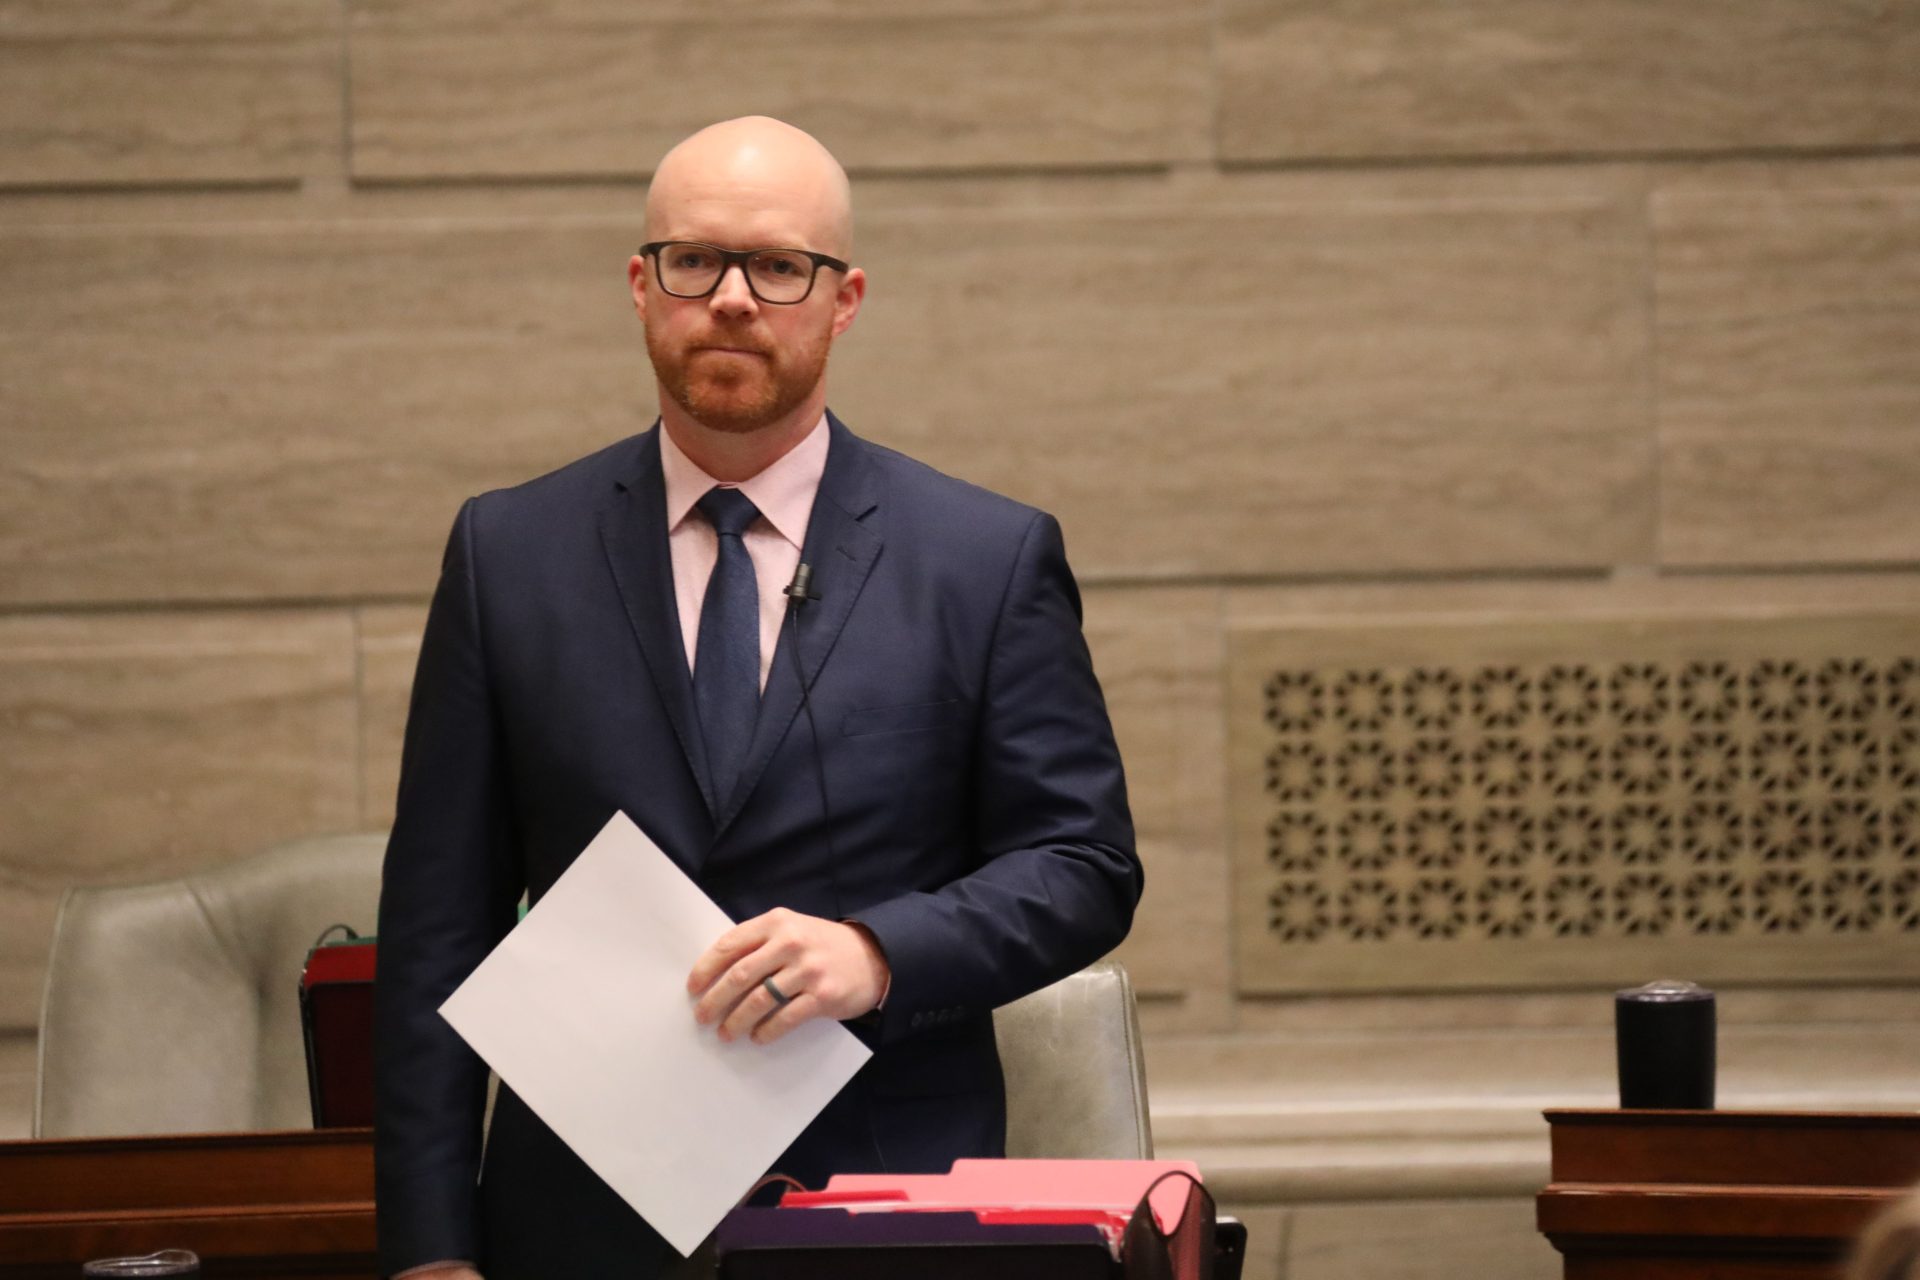 (LISTEN): State Sen. Travis Fitzwater (R-Holts Summit) discusses Senate filibuster on “Wake Up Mid-Missouri” | 93.9 The Eagle